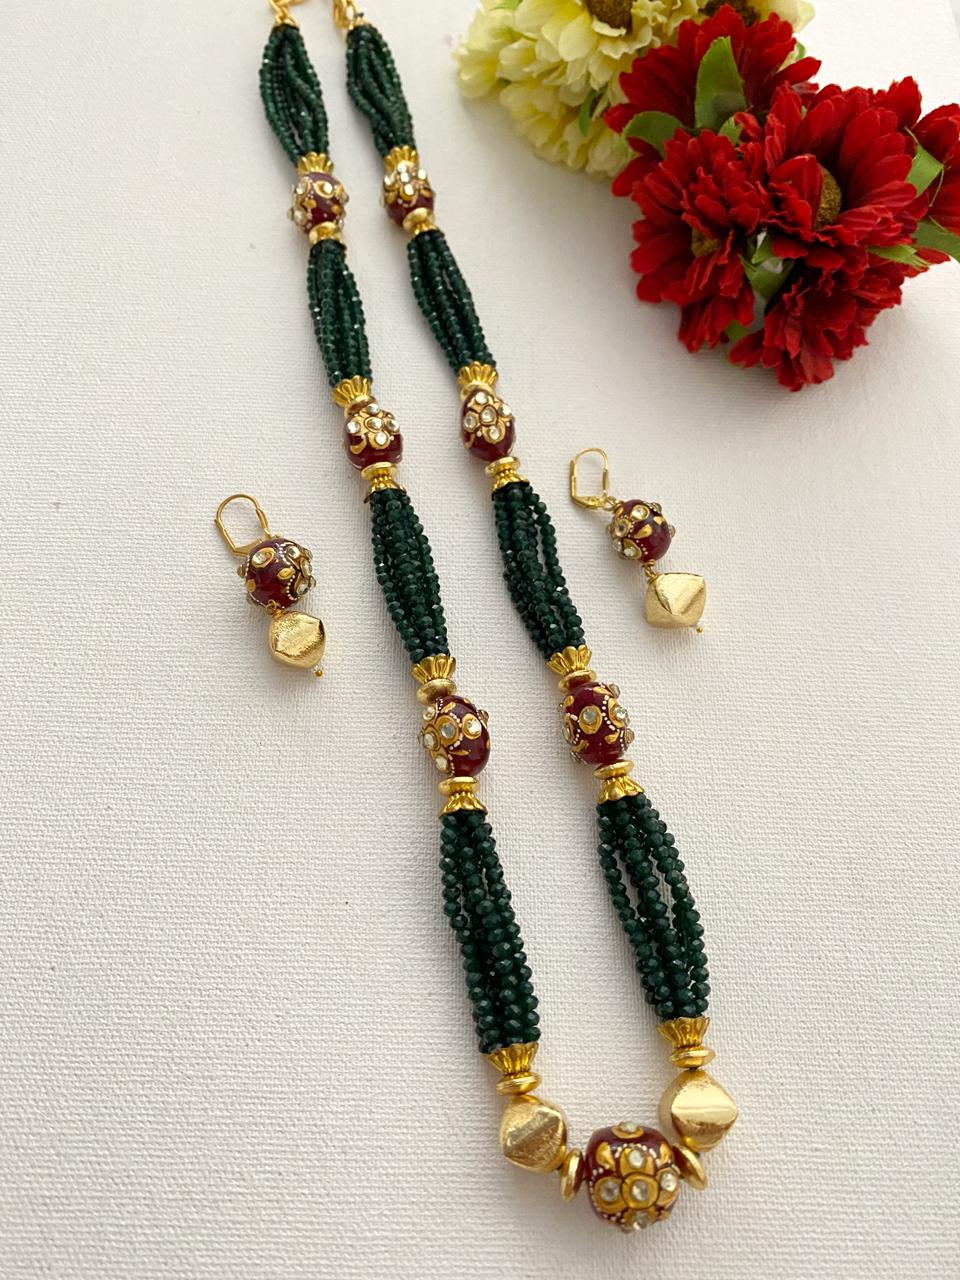 Designer Handcrafted Long Green Crystal Beaded Necklace Set By Gehna Shop Beads Jewellery